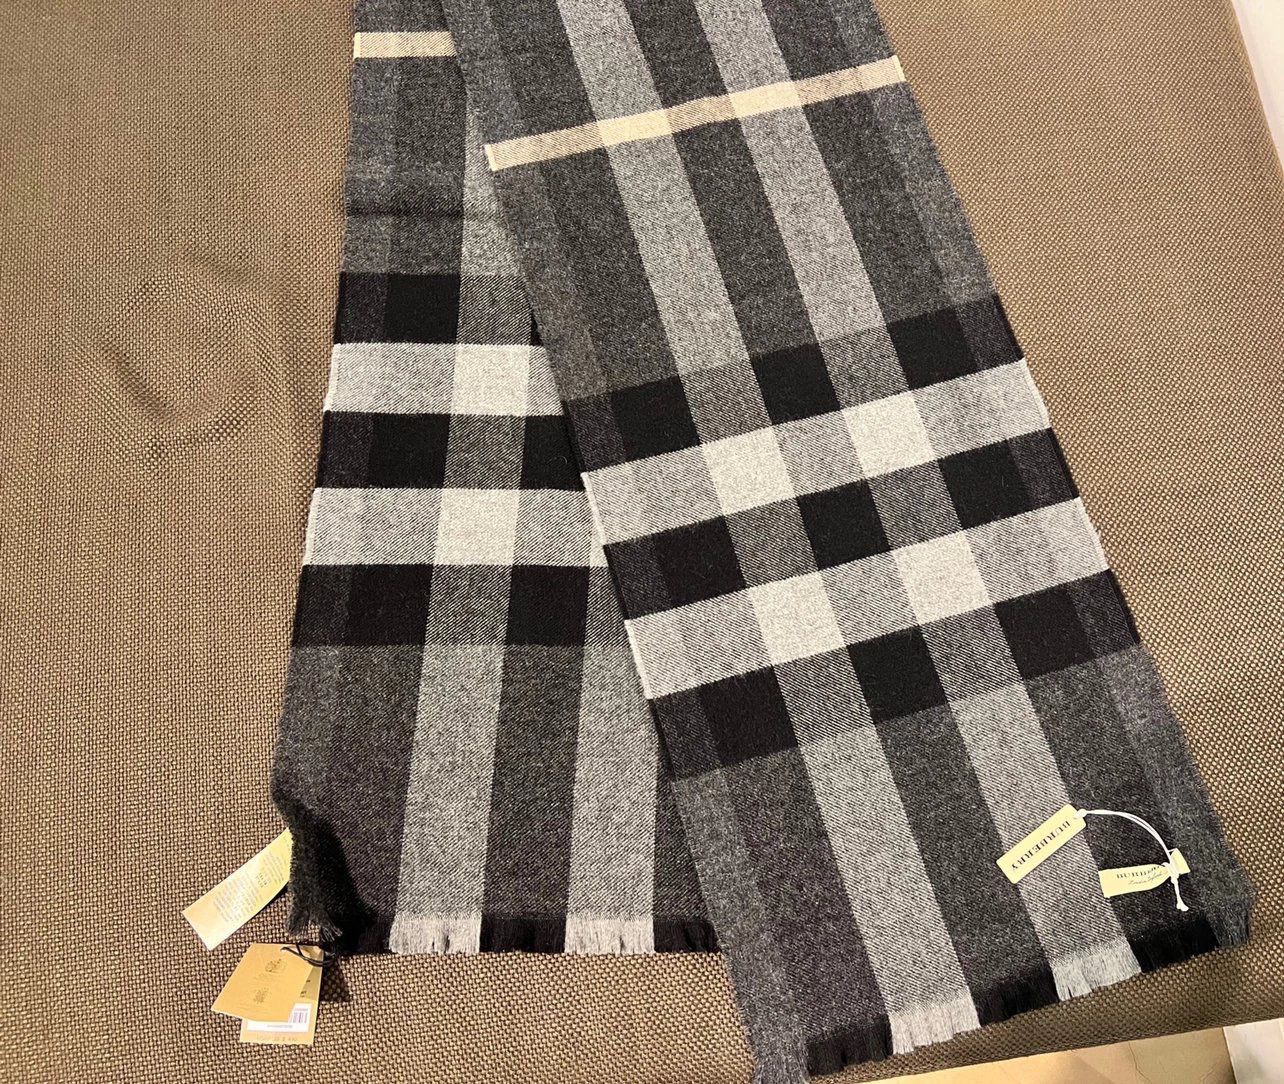 Burberry Cashmere Scarf, Camel Check, New with tags for Sale in Omaha, NE -  OfferUp